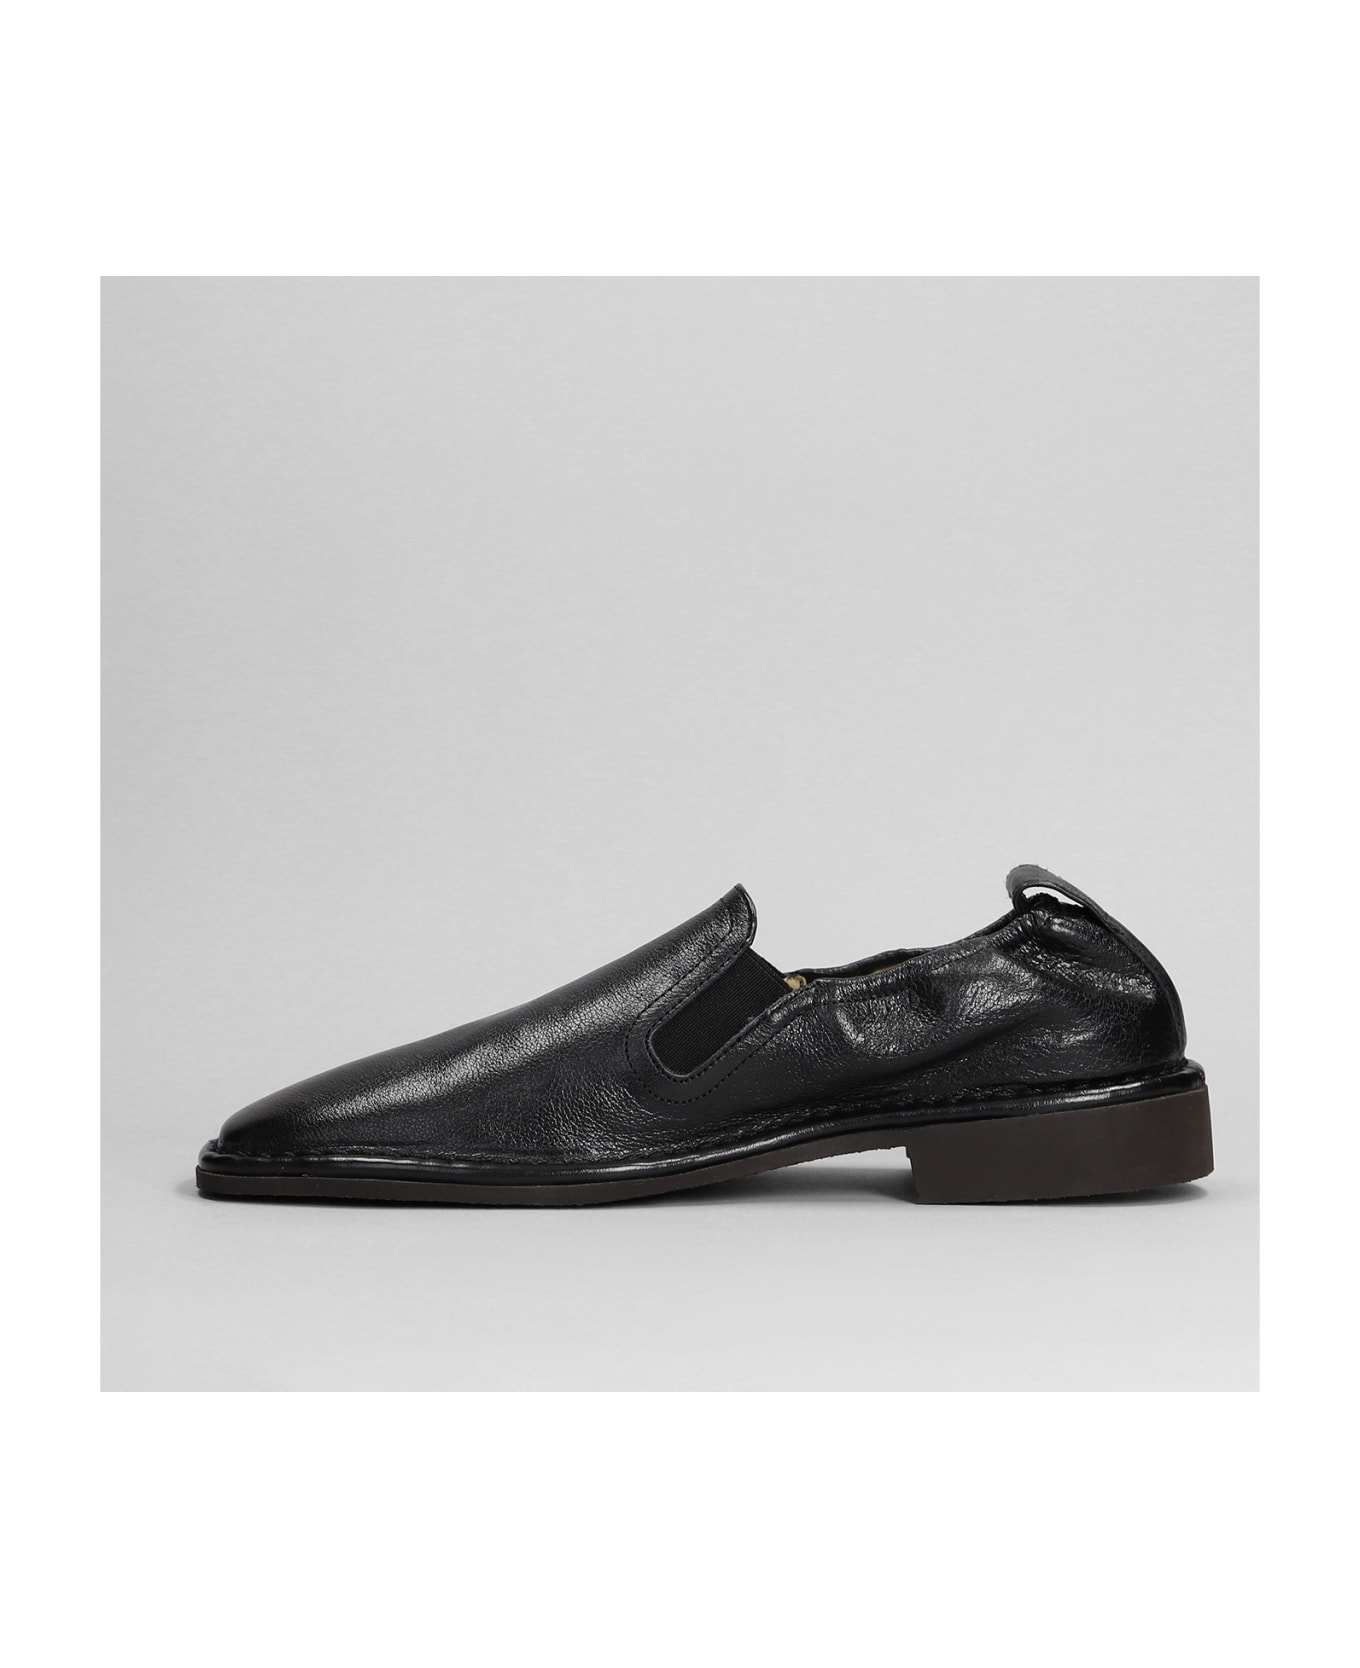 Lemaire Loafers In Black Leather - black ローファー＆デッキシューズ